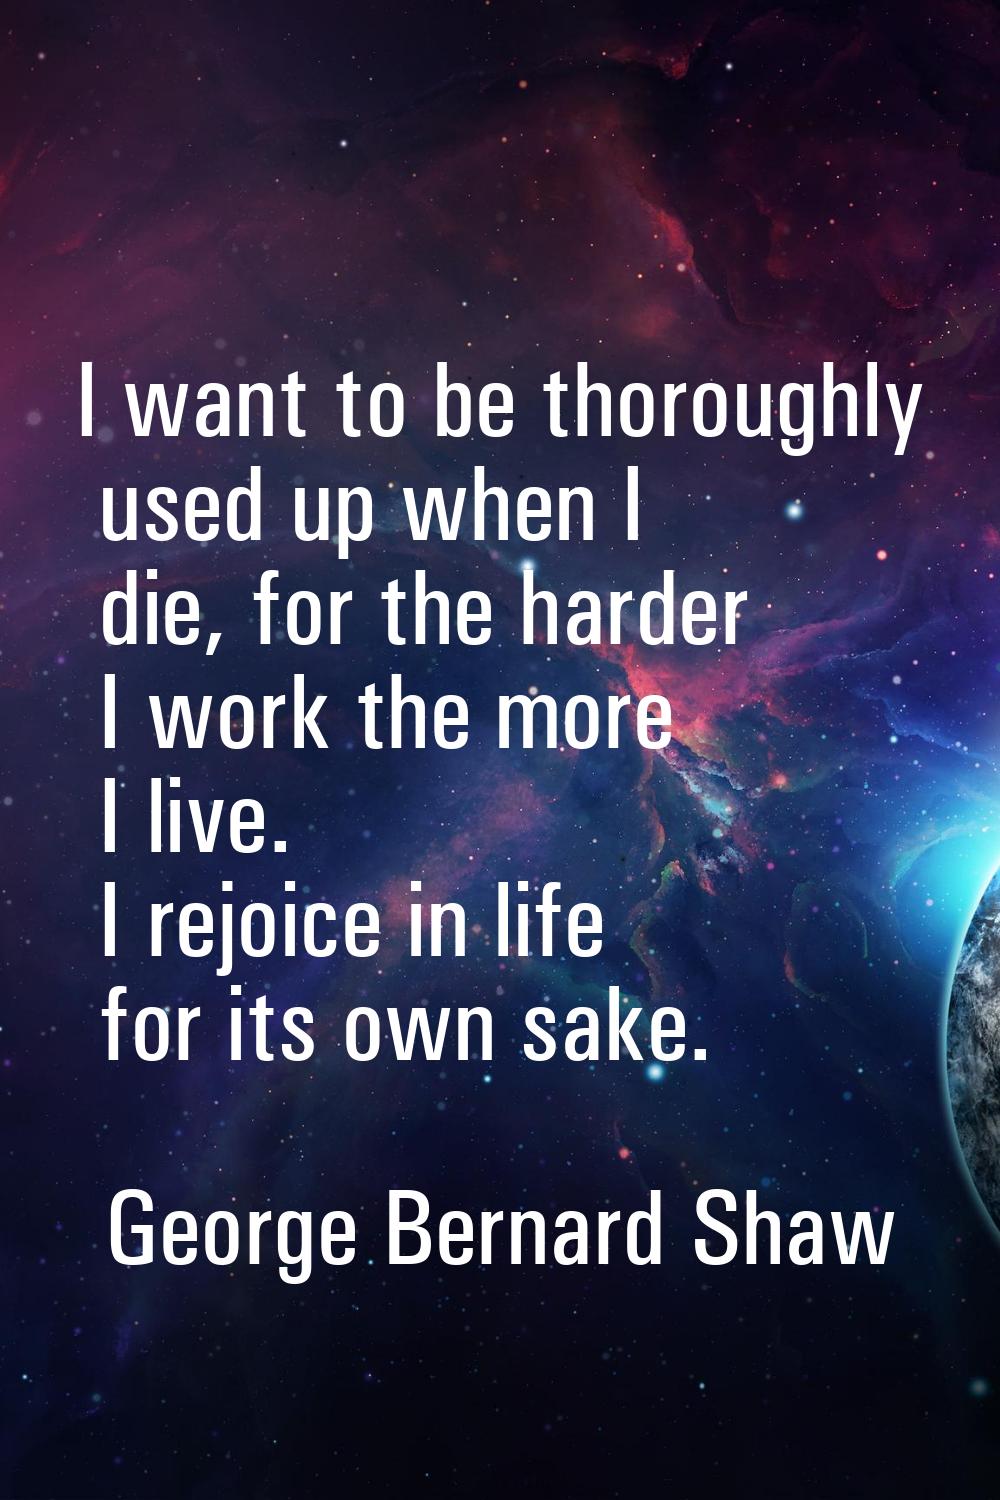 I want to be thoroughly used up when I die, for the harder I work the more I live. I rejoice in lif